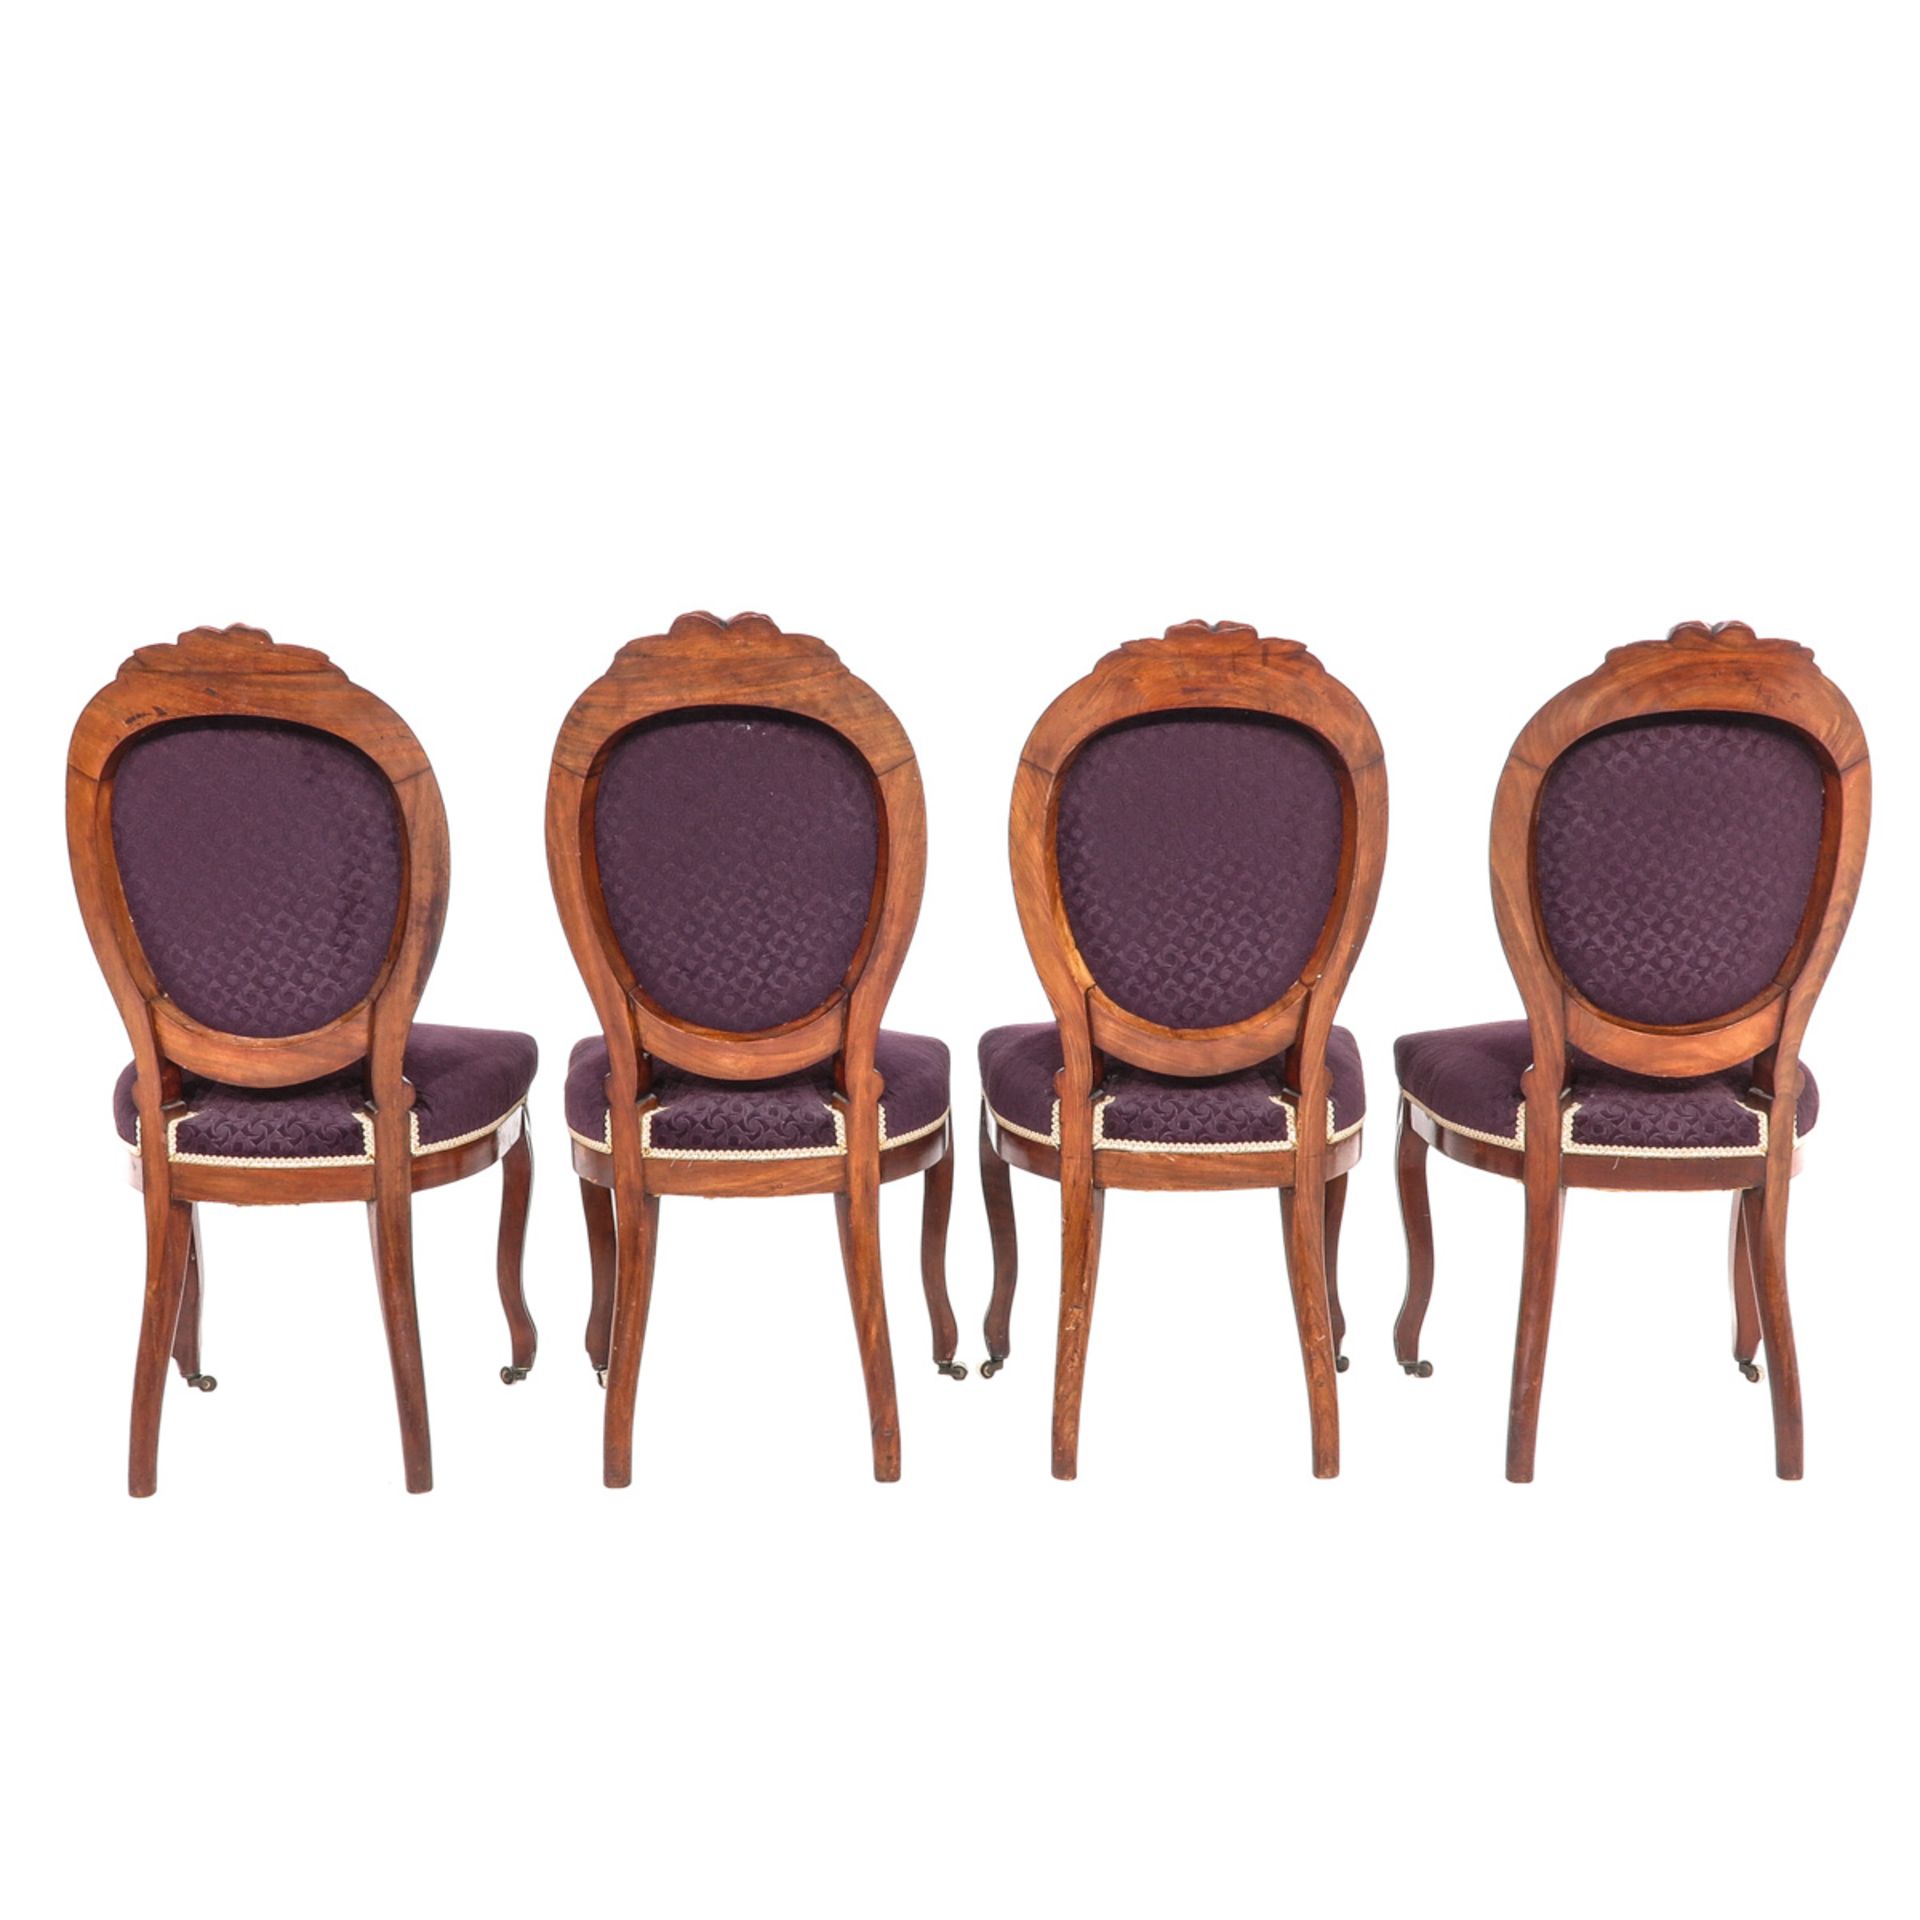 A Dinner Table with 4 Chairs - Image 9 of 10